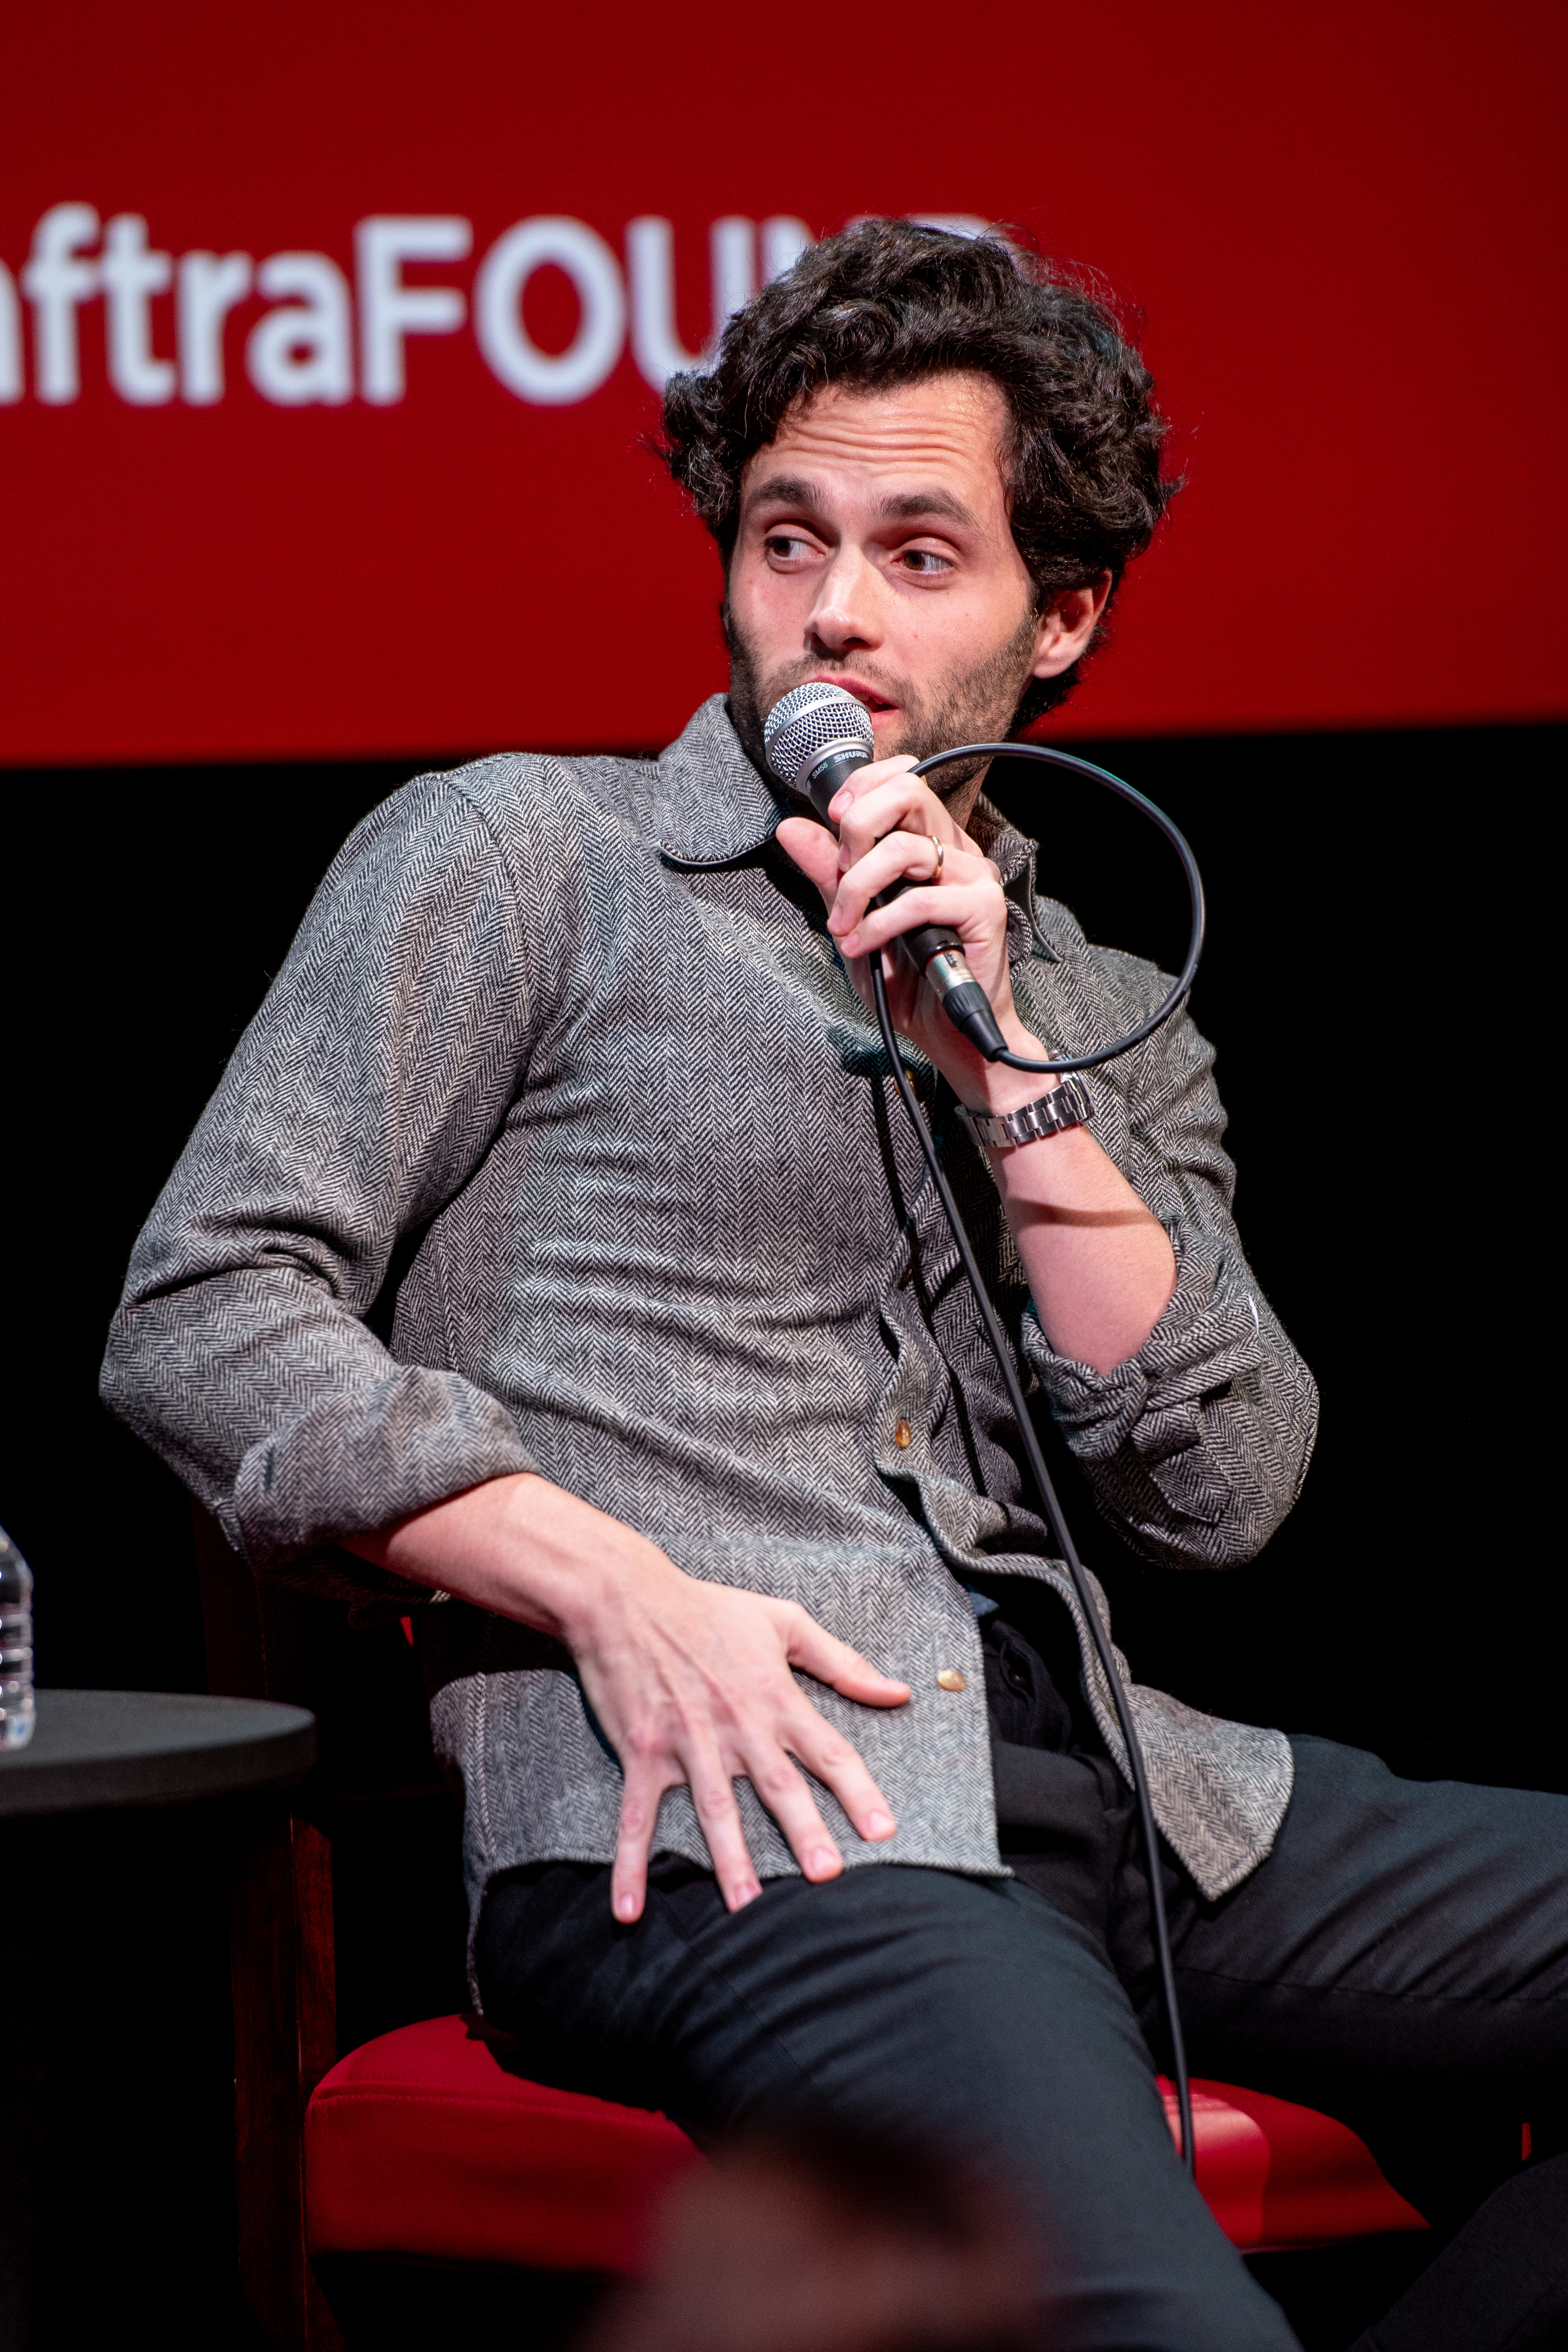 Penn Badgley seated with a microphone, wearing a buttoned shirt and jacket, at a speaking event